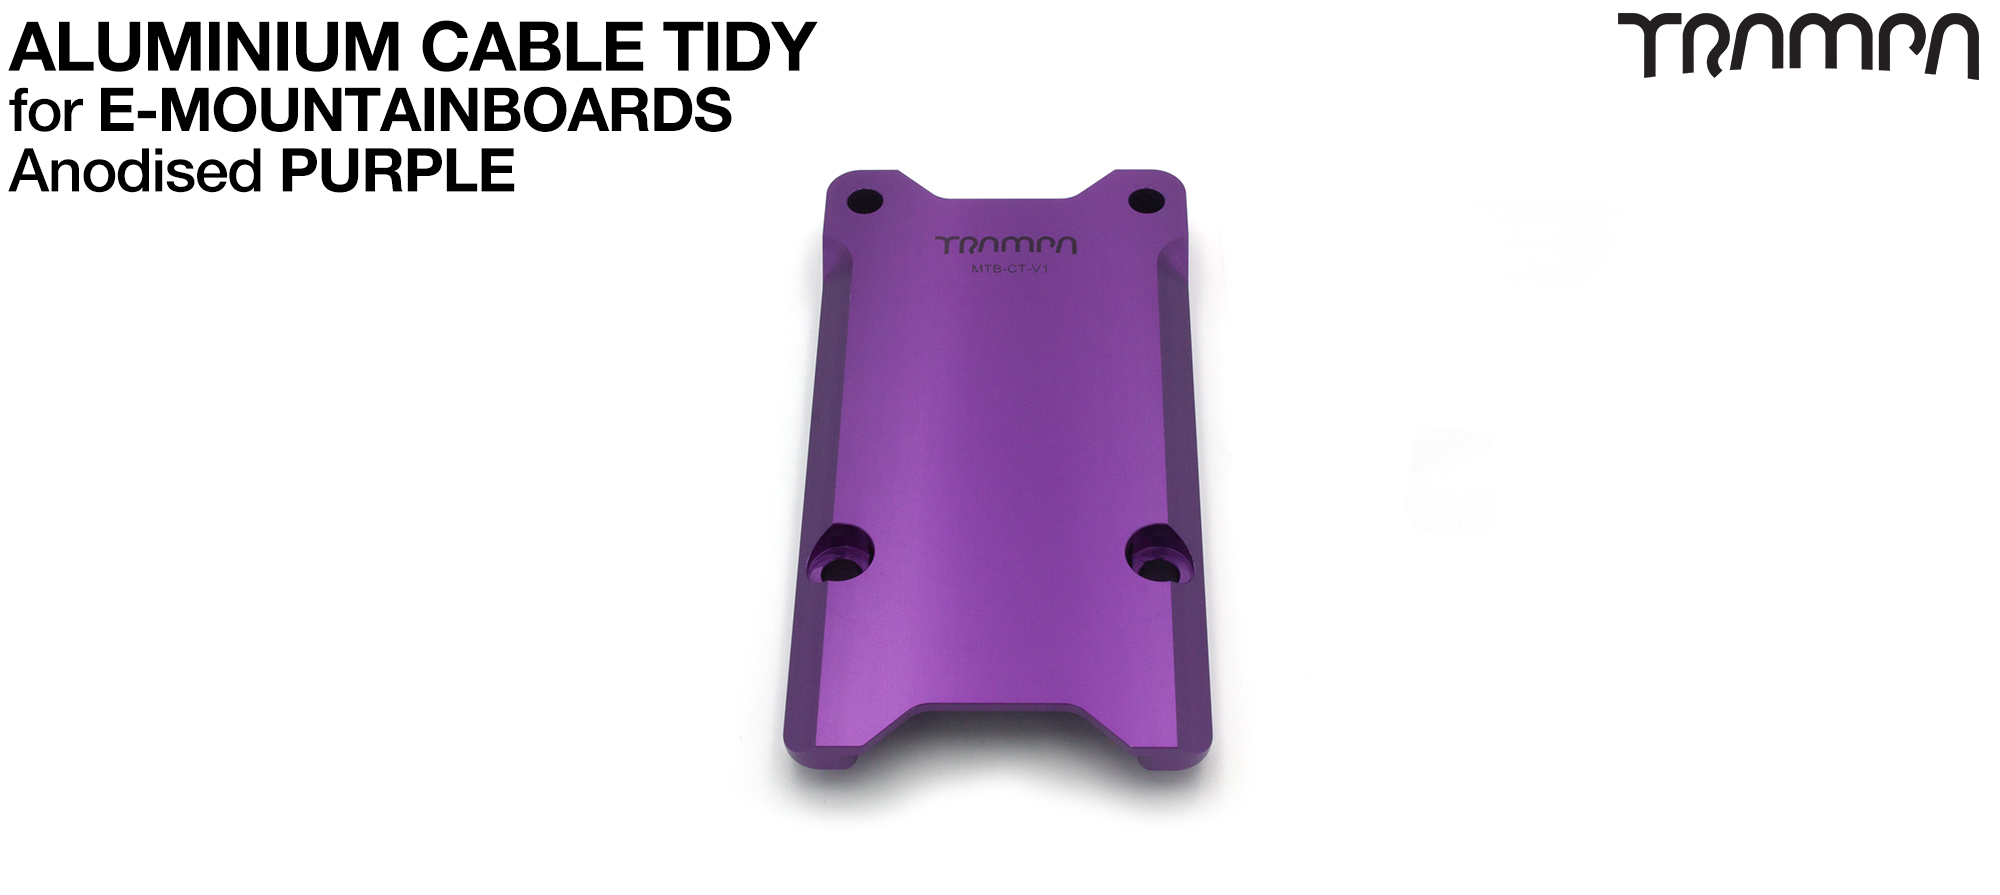 CABLE Router Anodised - PURPLE 